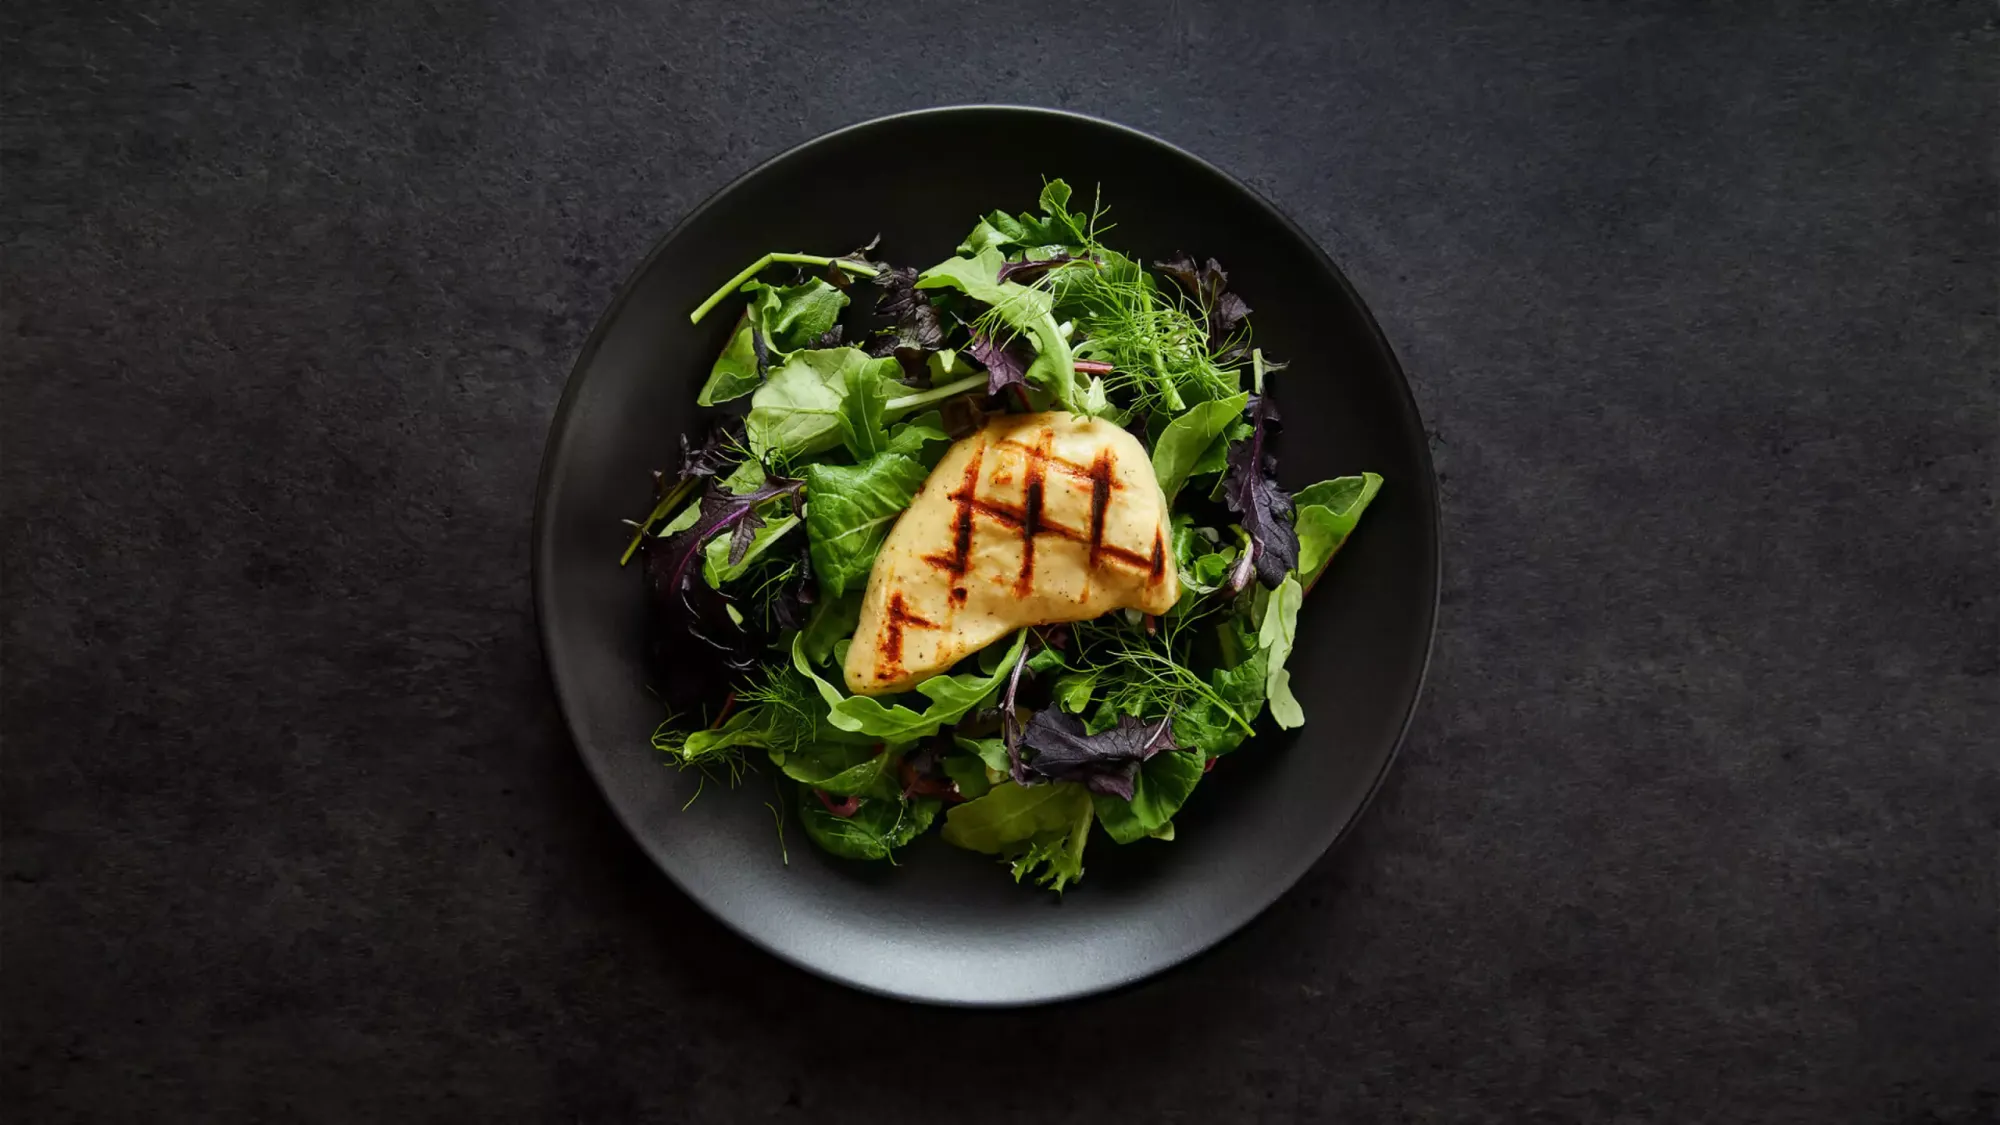 A chicken breast with grill marks sits in the middle of a plate of leafy greens.